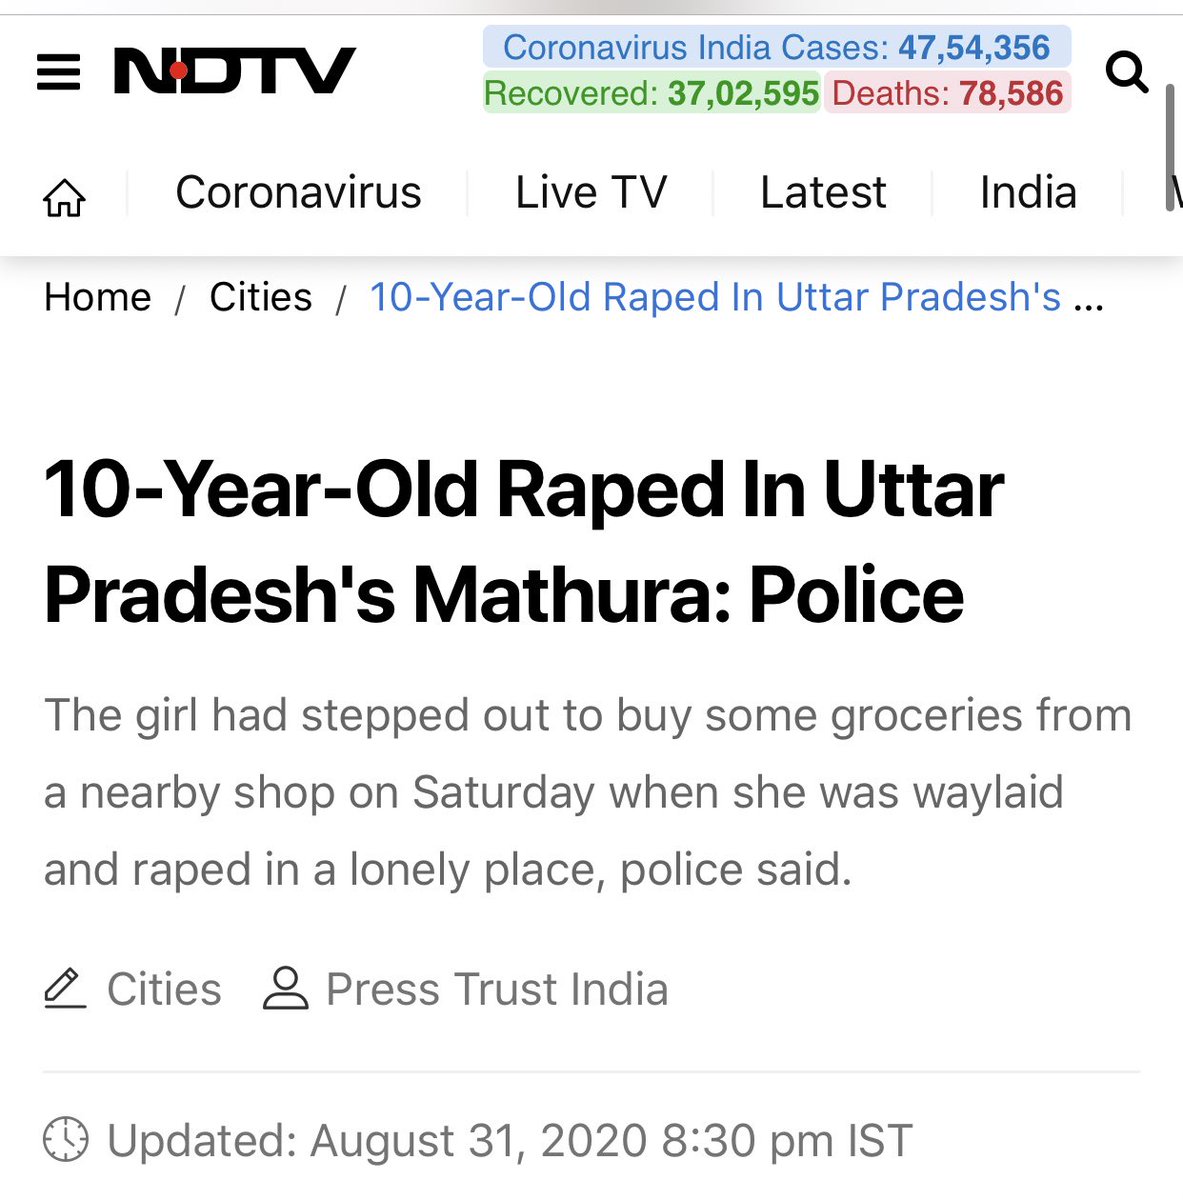 Uddhav Thackeray has failed miserably as a Chief Minister. Crimes - especially against women - are happening at a chilling regularity. Total collapse of law & order in the state. President’s rule should be imposed immediately.Here’s a thread exposing Uddhav’s incompetence.